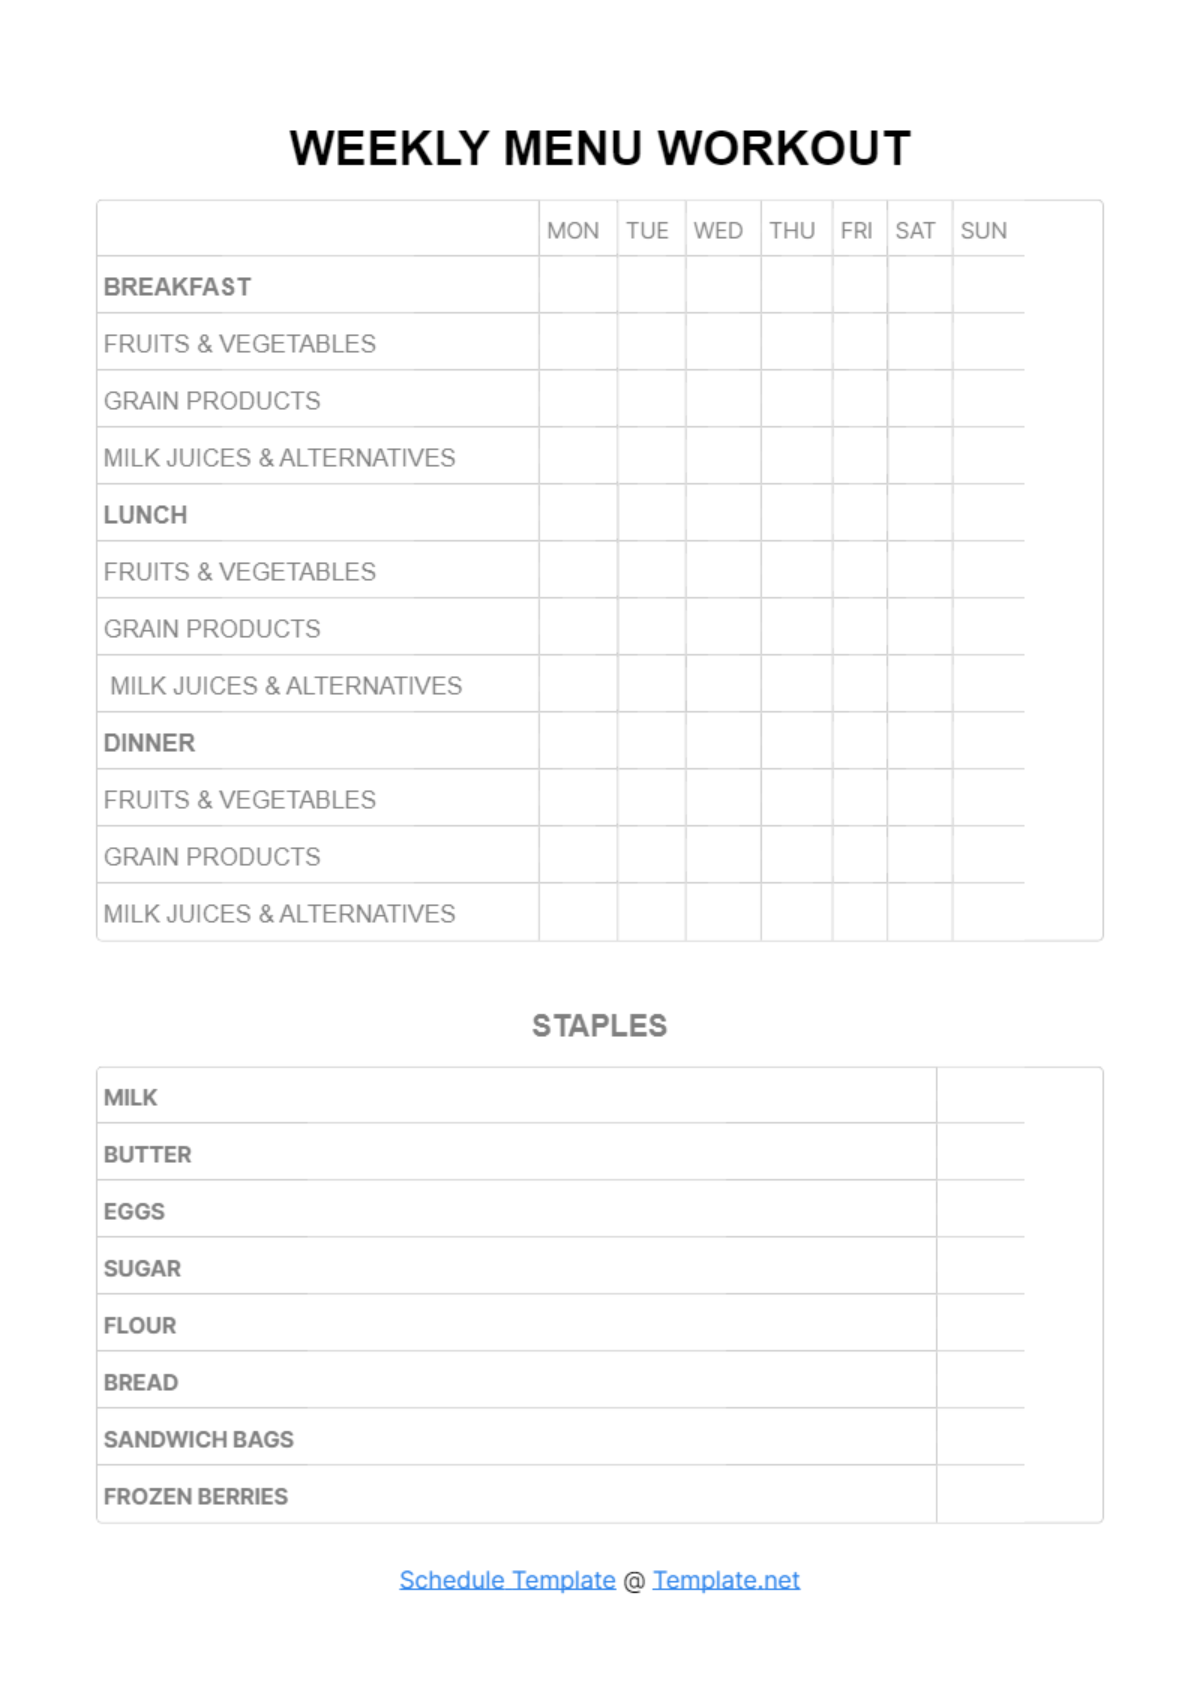 Weekly Menu Workout Schedule Template